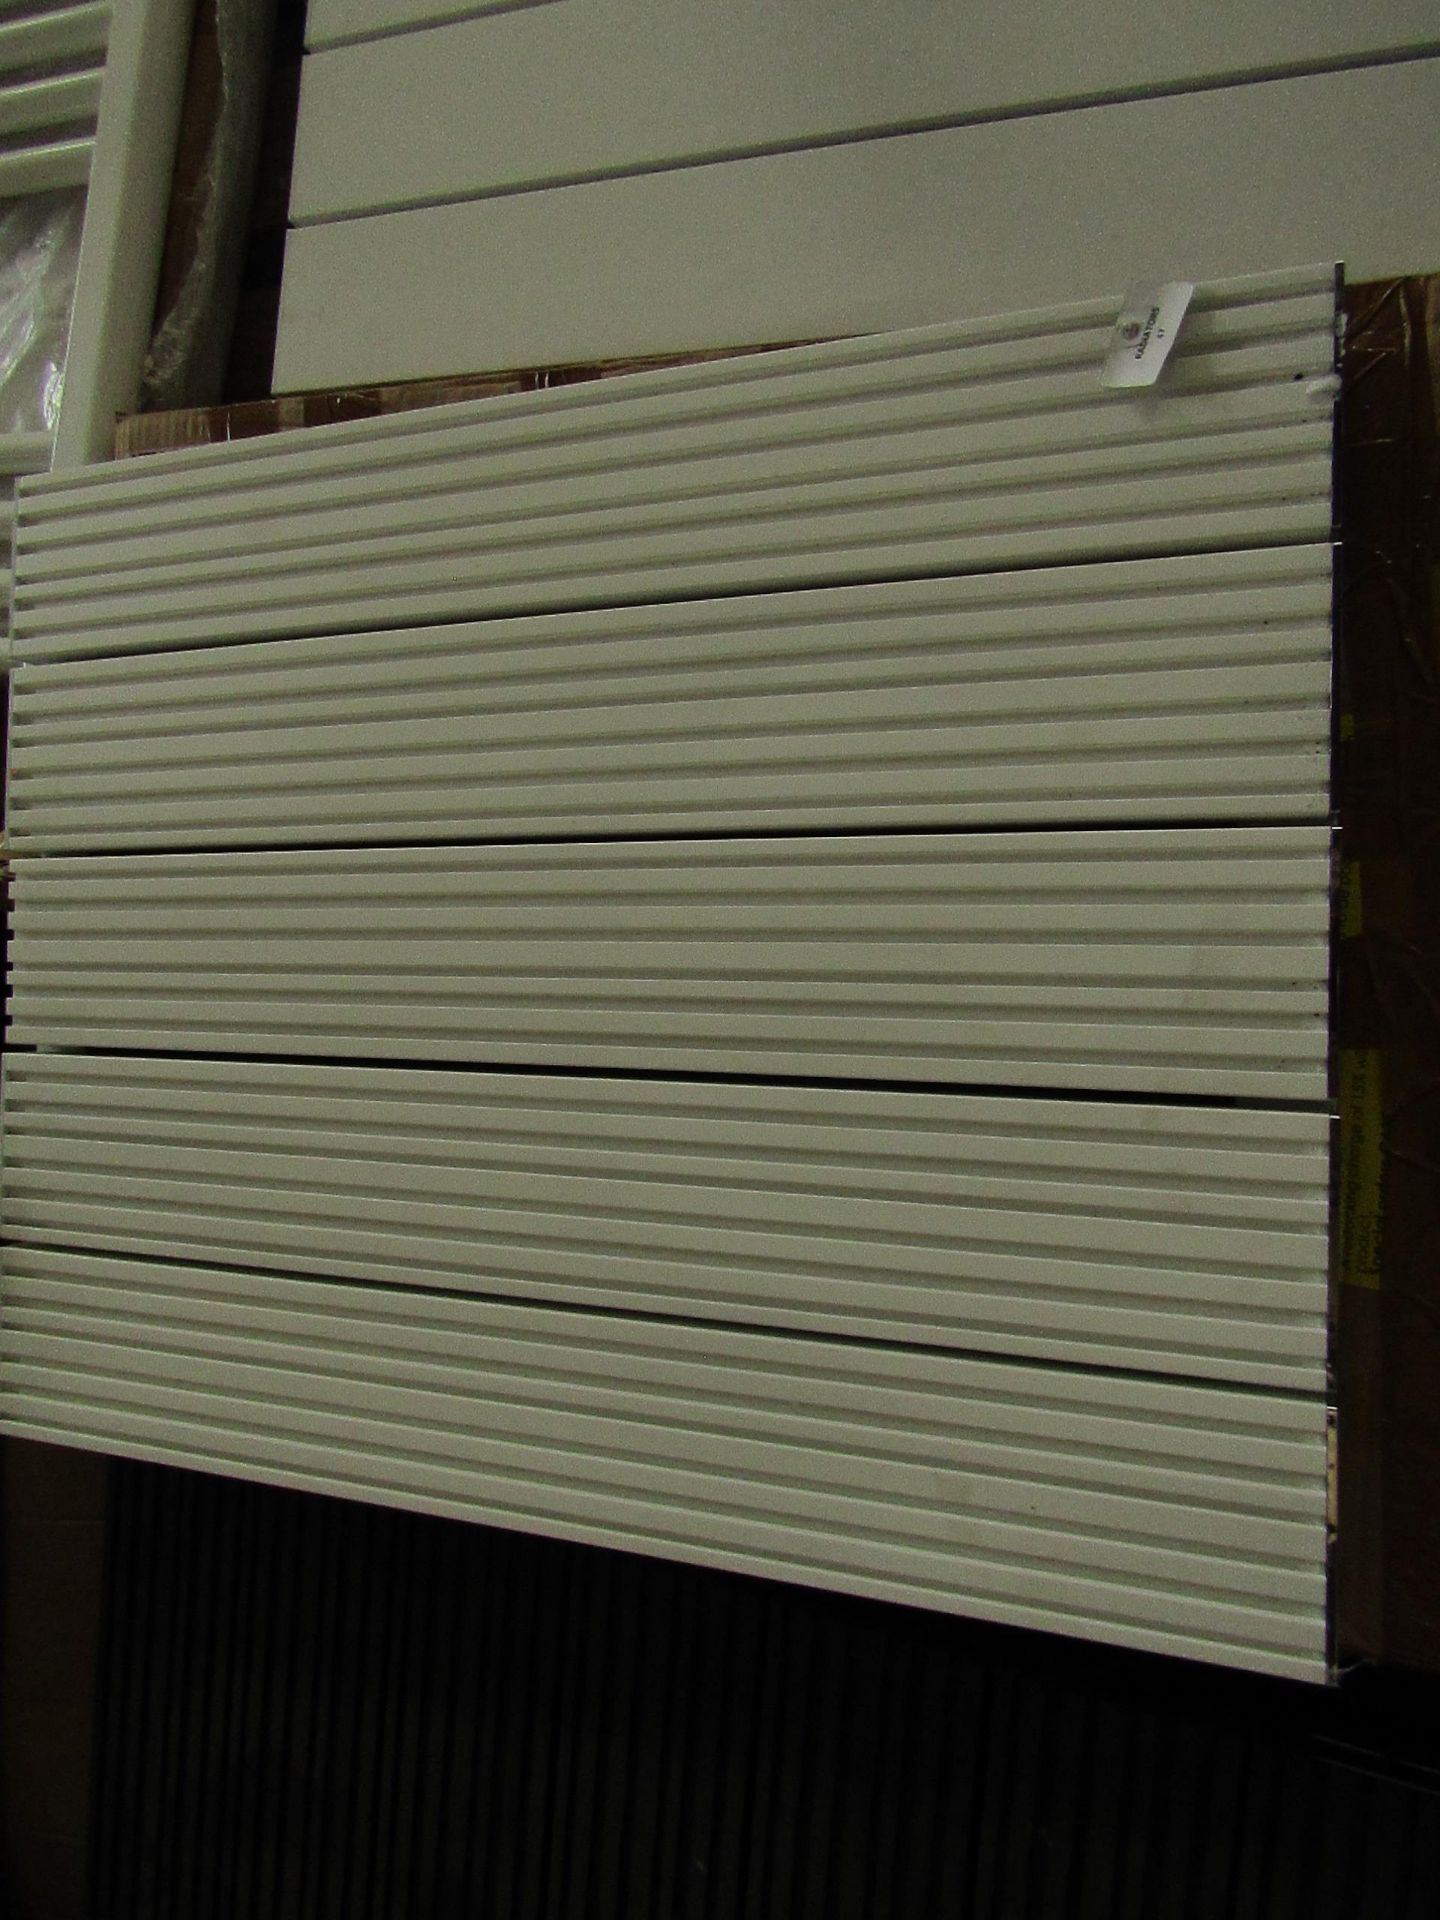 Carisa - Nemo Monza Double White Radiator - 470x600mm - Look To Be In Good Condition, Viewing